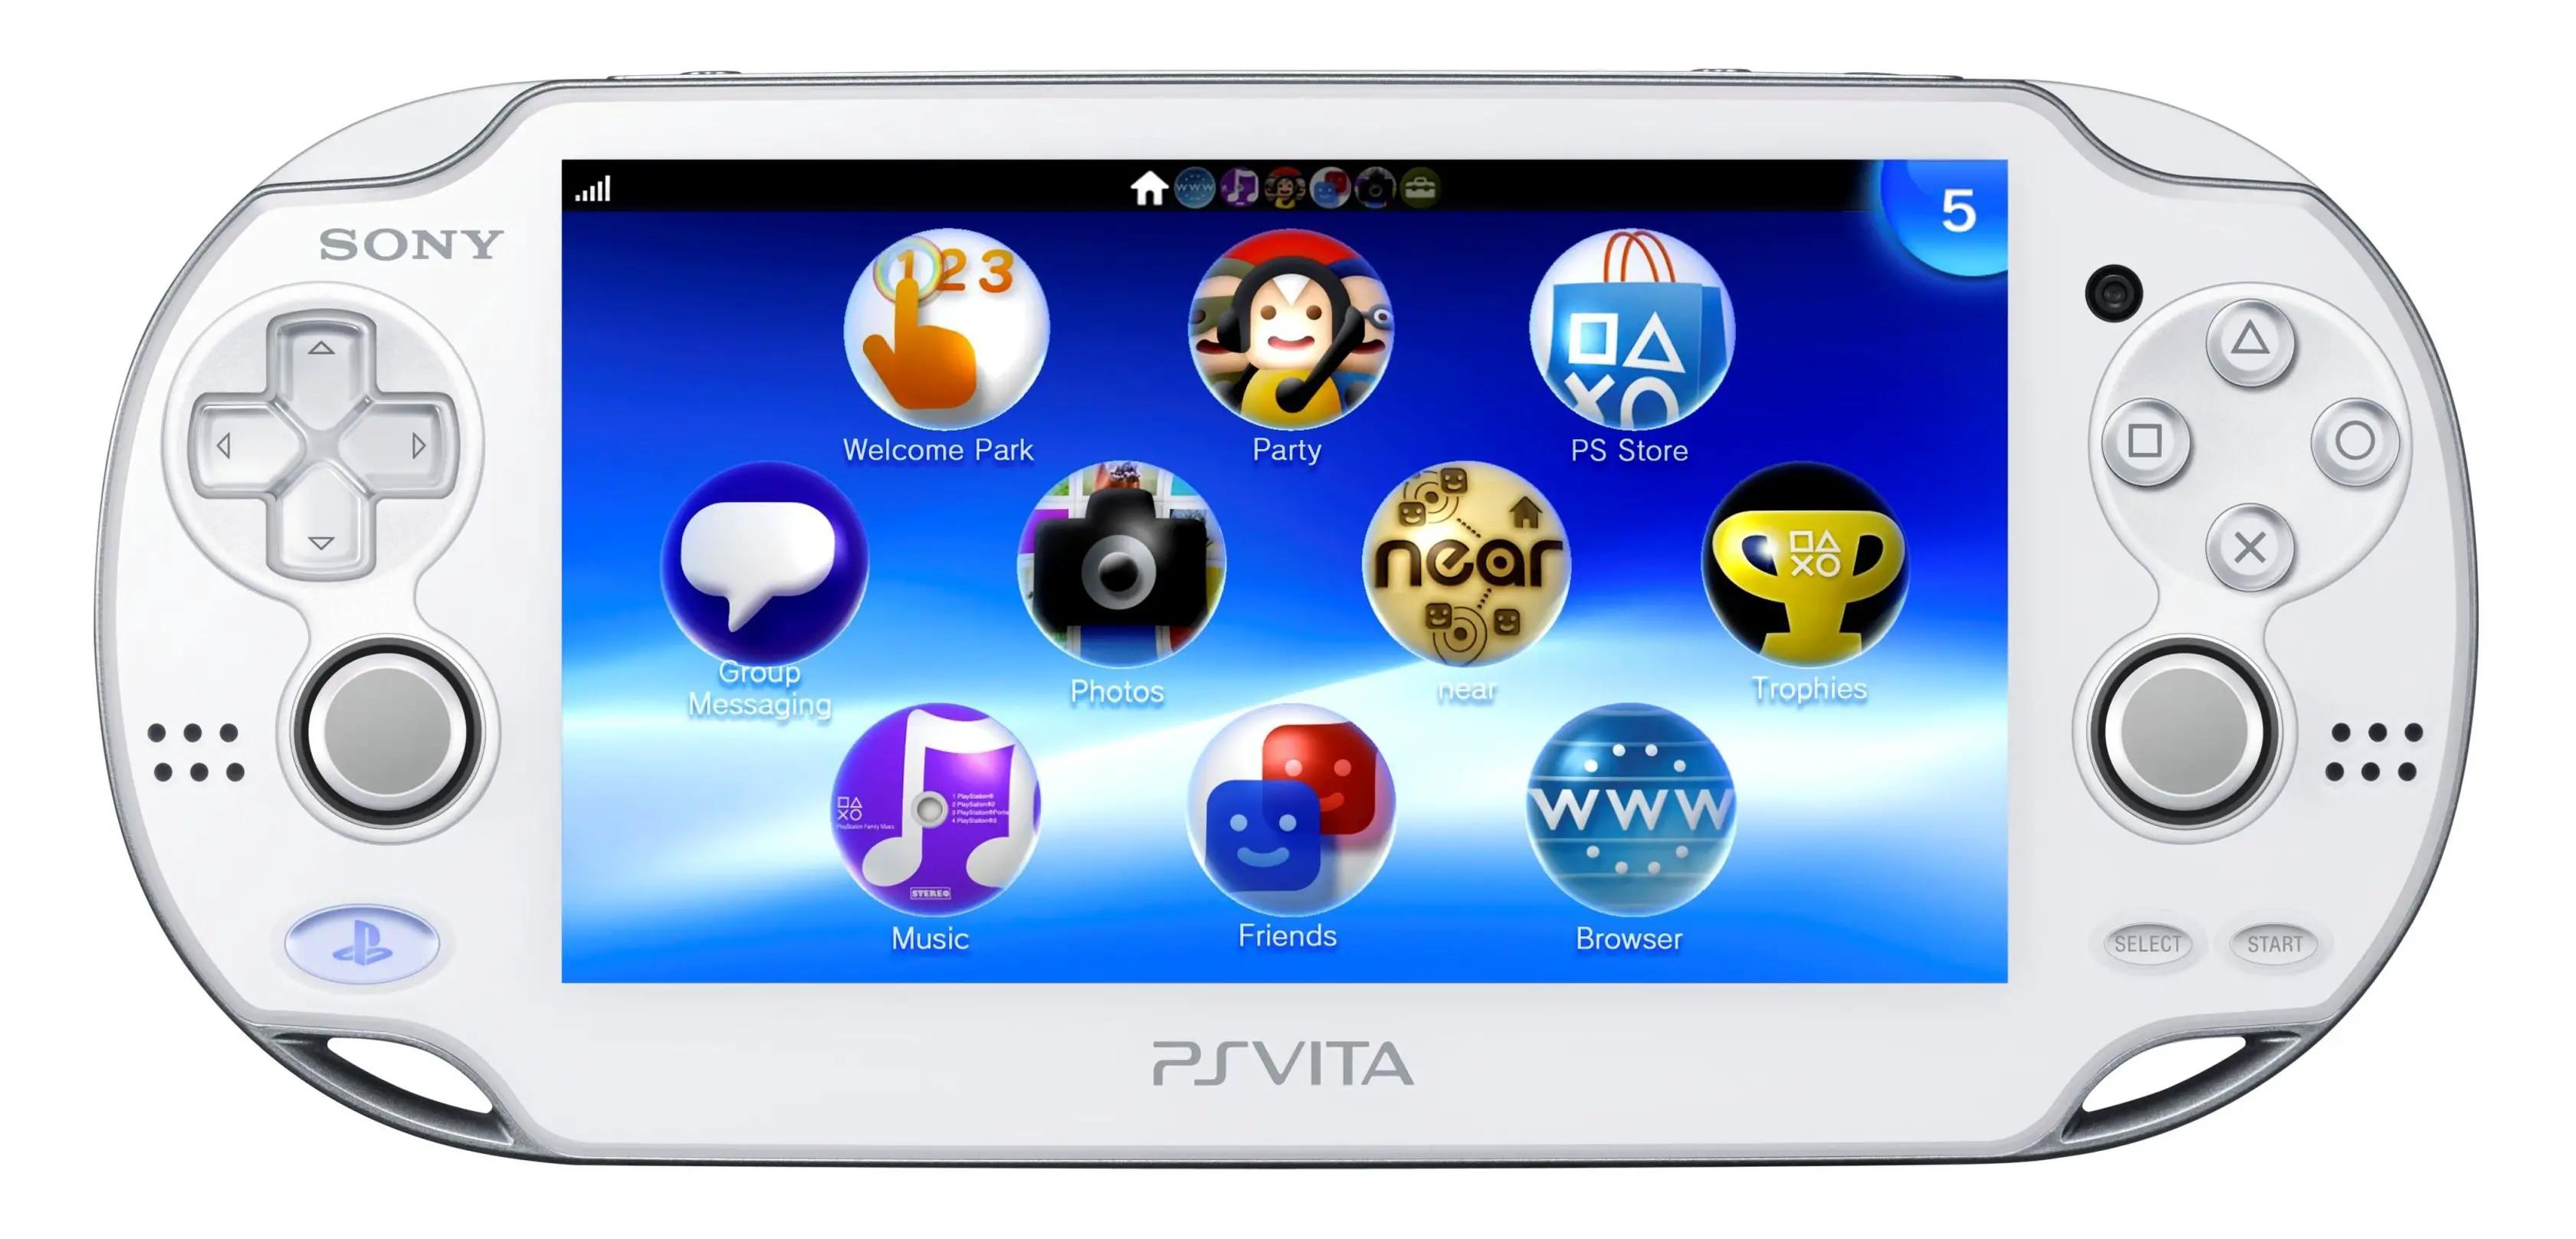 What Kind Of Games Can I Download For The PS Vita?